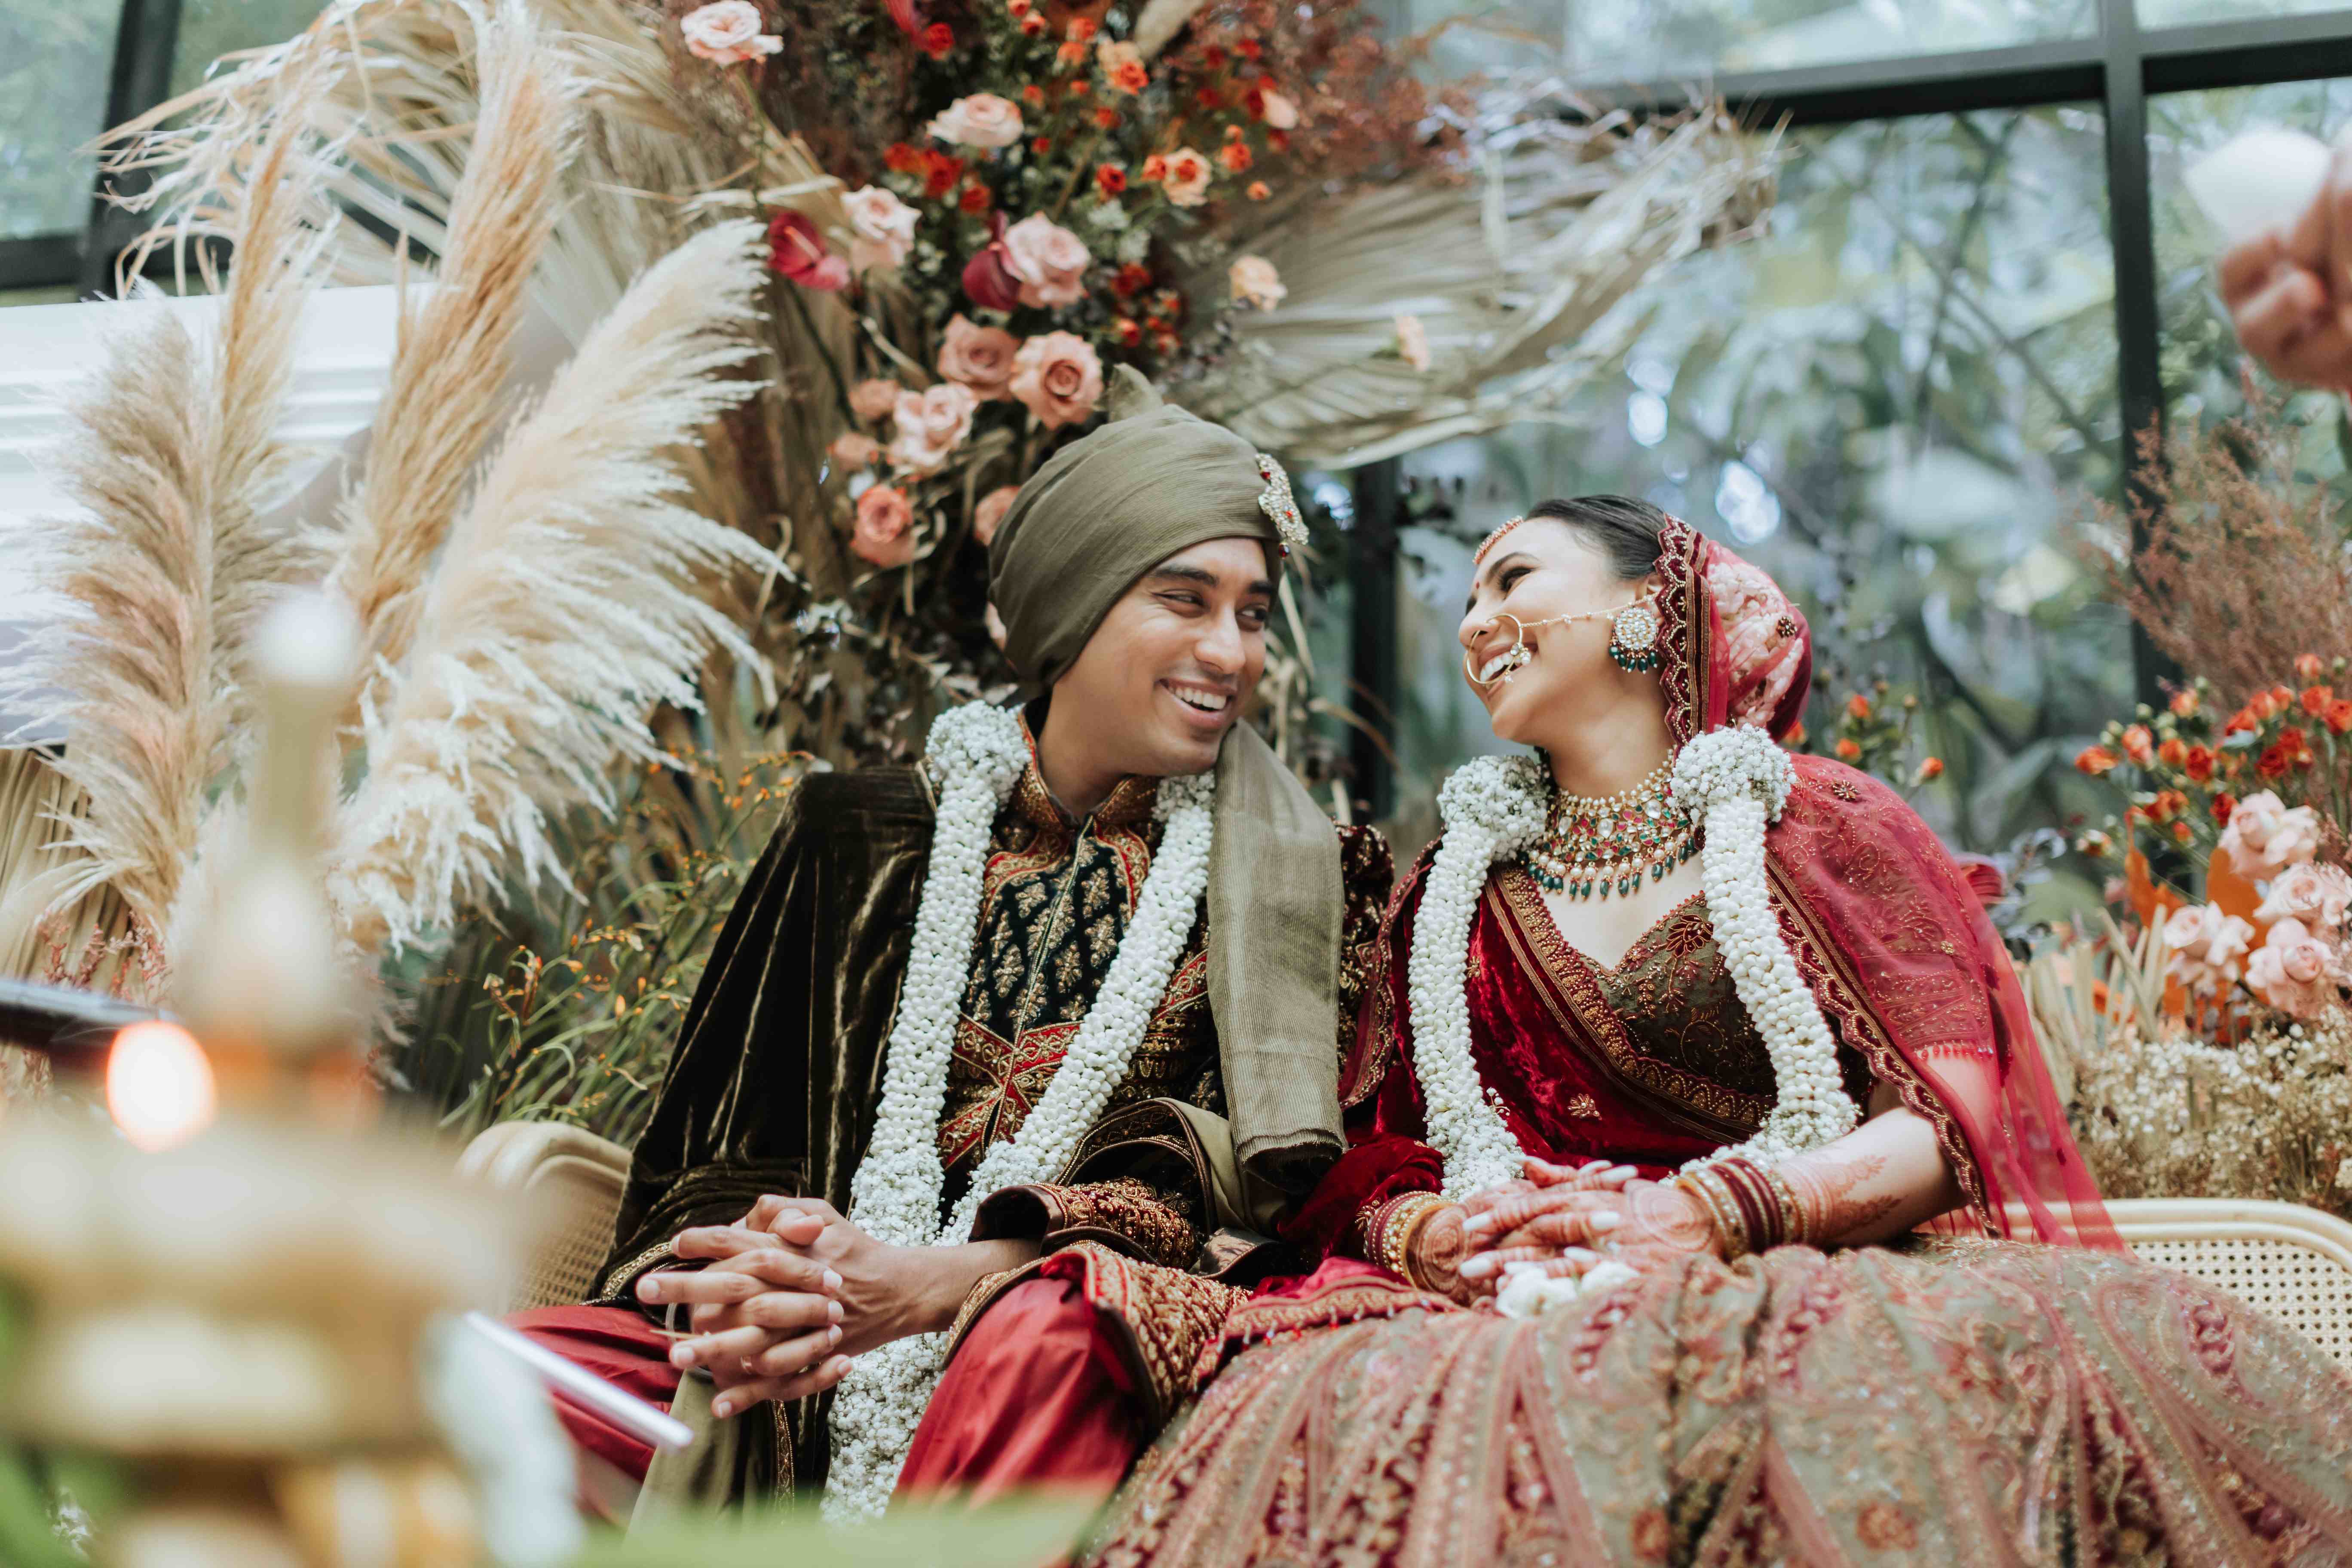 This Multicultural Wedding In Malaysia Was Full Of Candid Moments